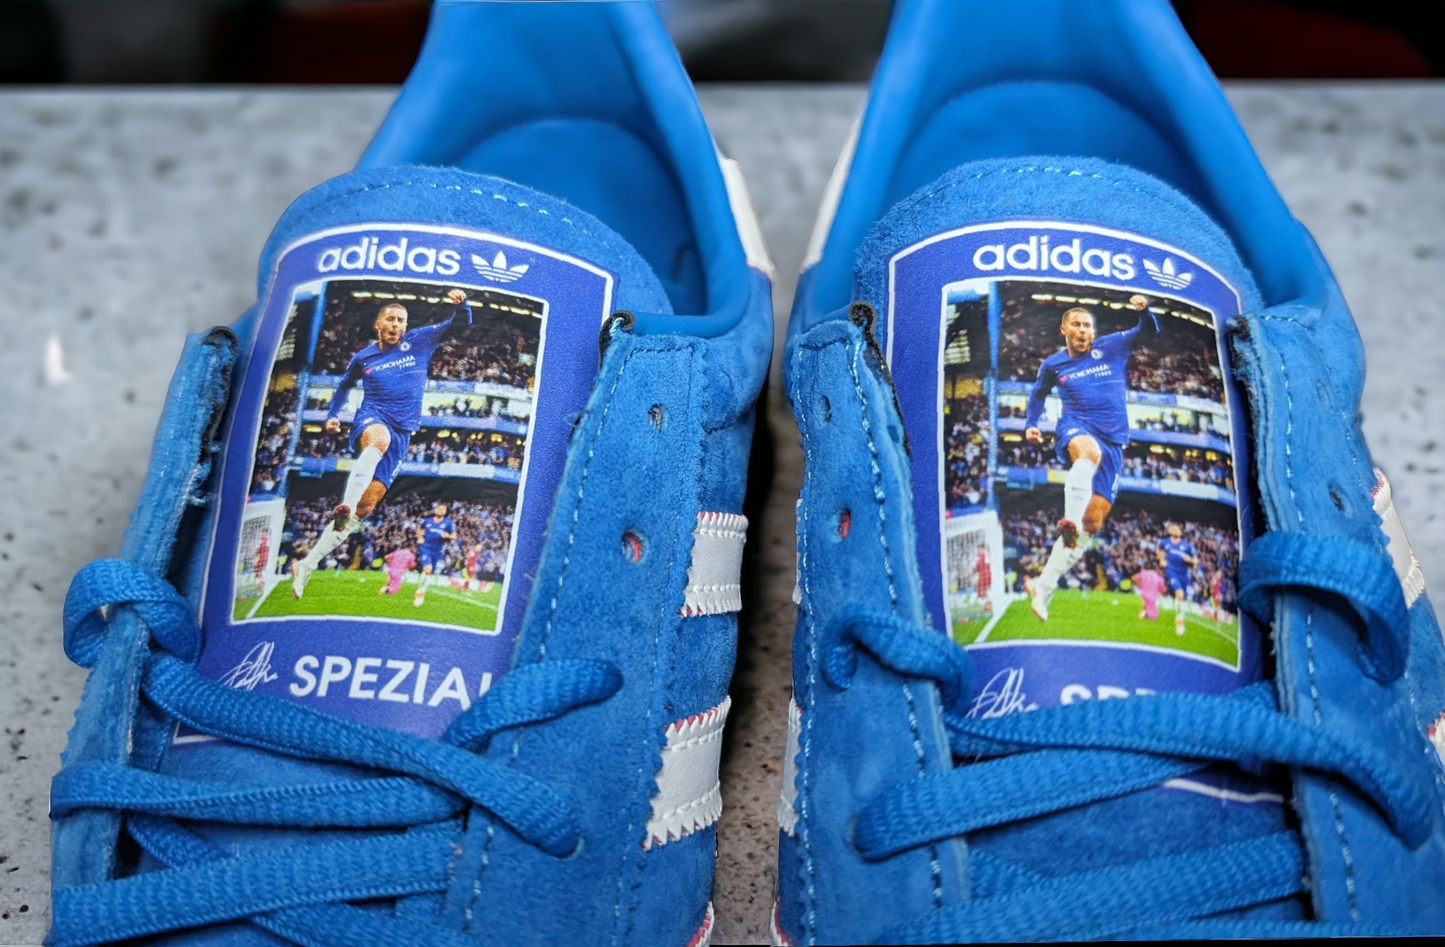 Limited edition Chelsea FC Eden Hazard inspired blue /white/ suede Adidas custom Handball Spezial  trainers / sneakers